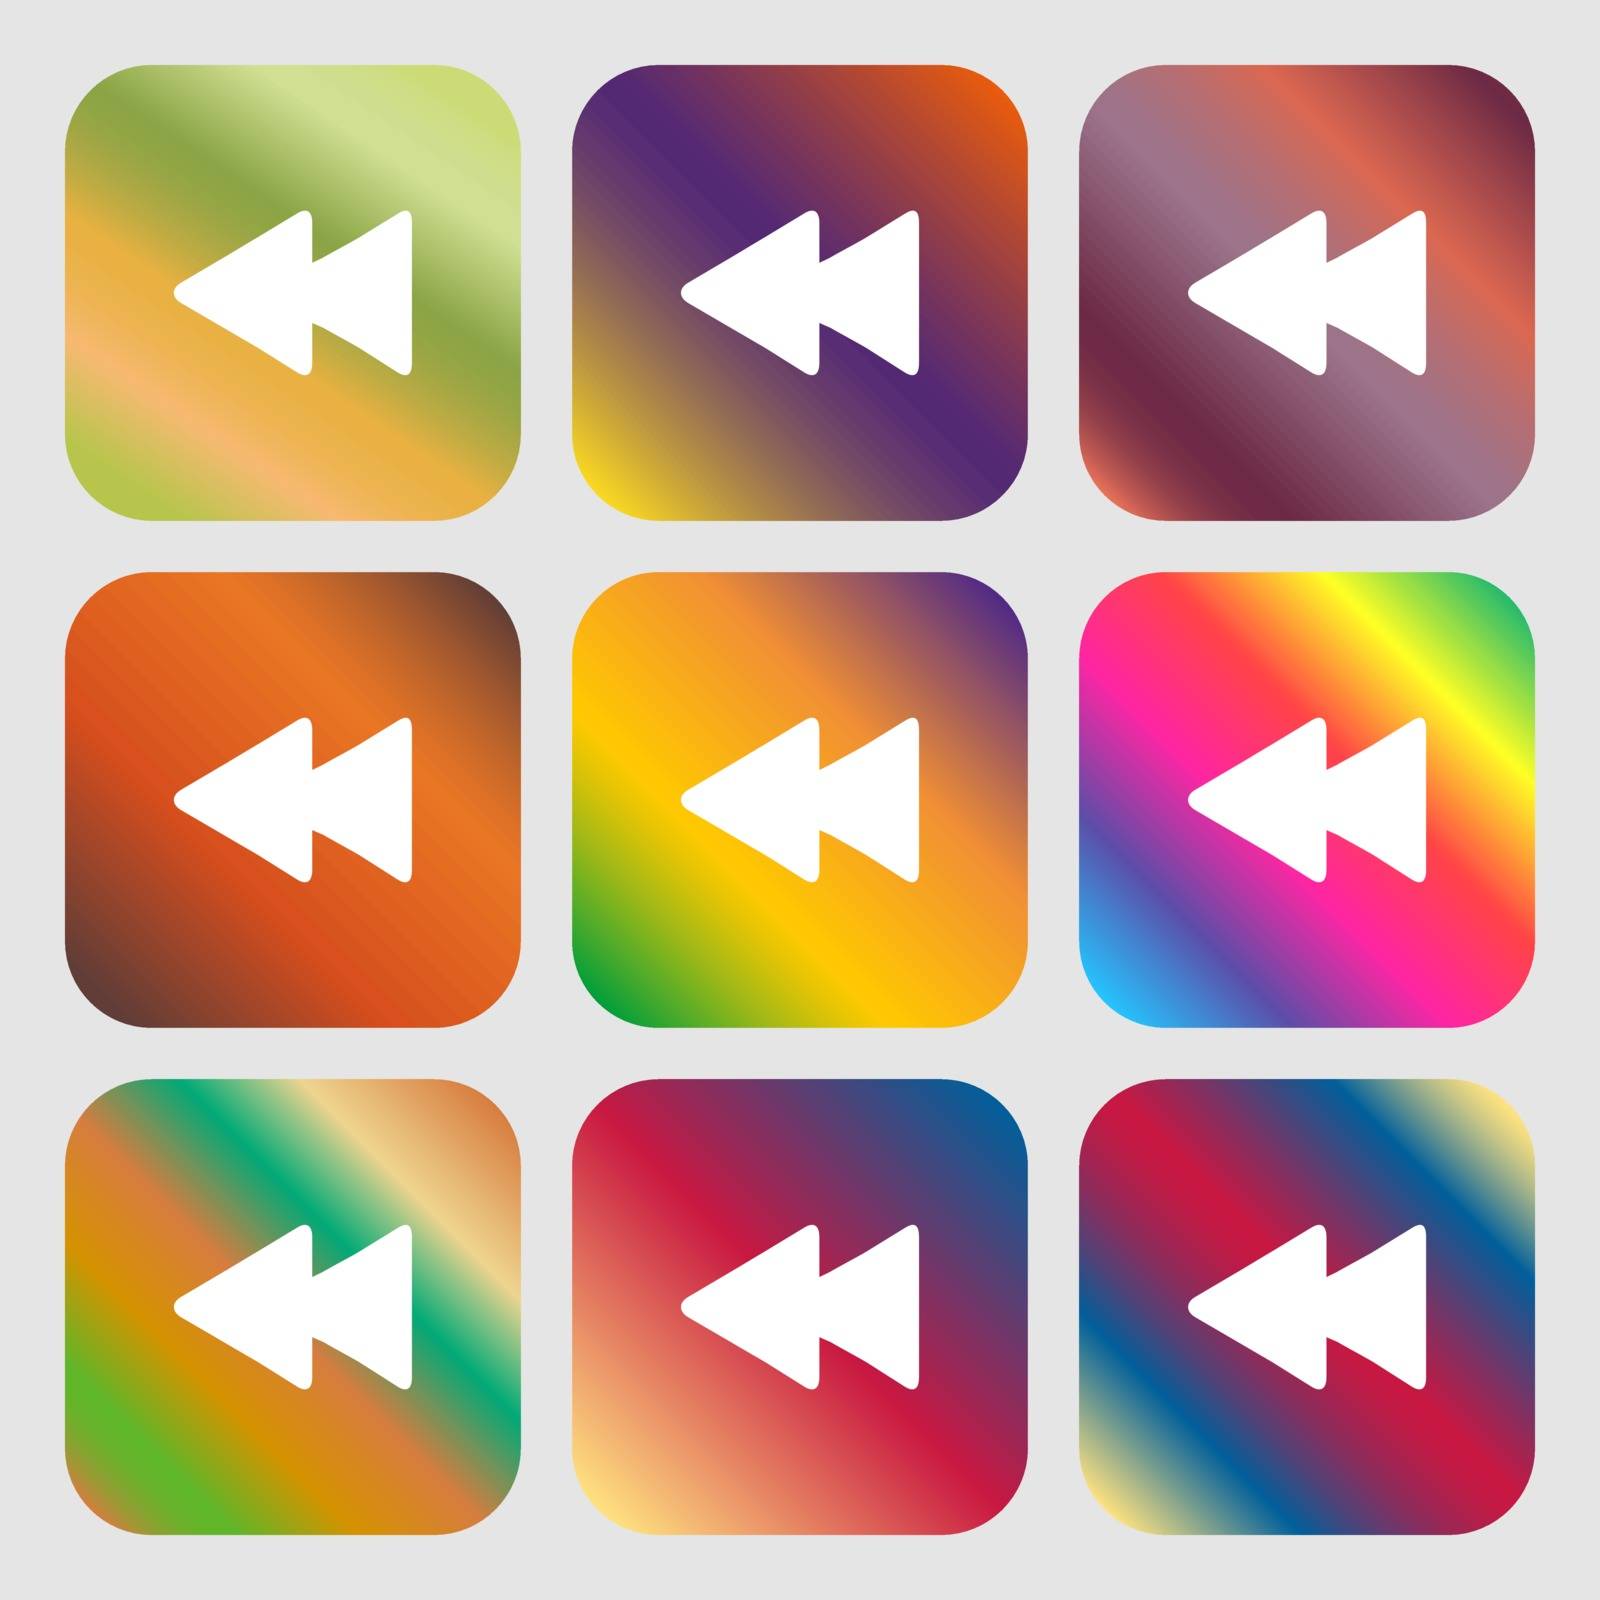 rewind icon. Nine buttons with bright gradients for beautiful design. Vector illustration